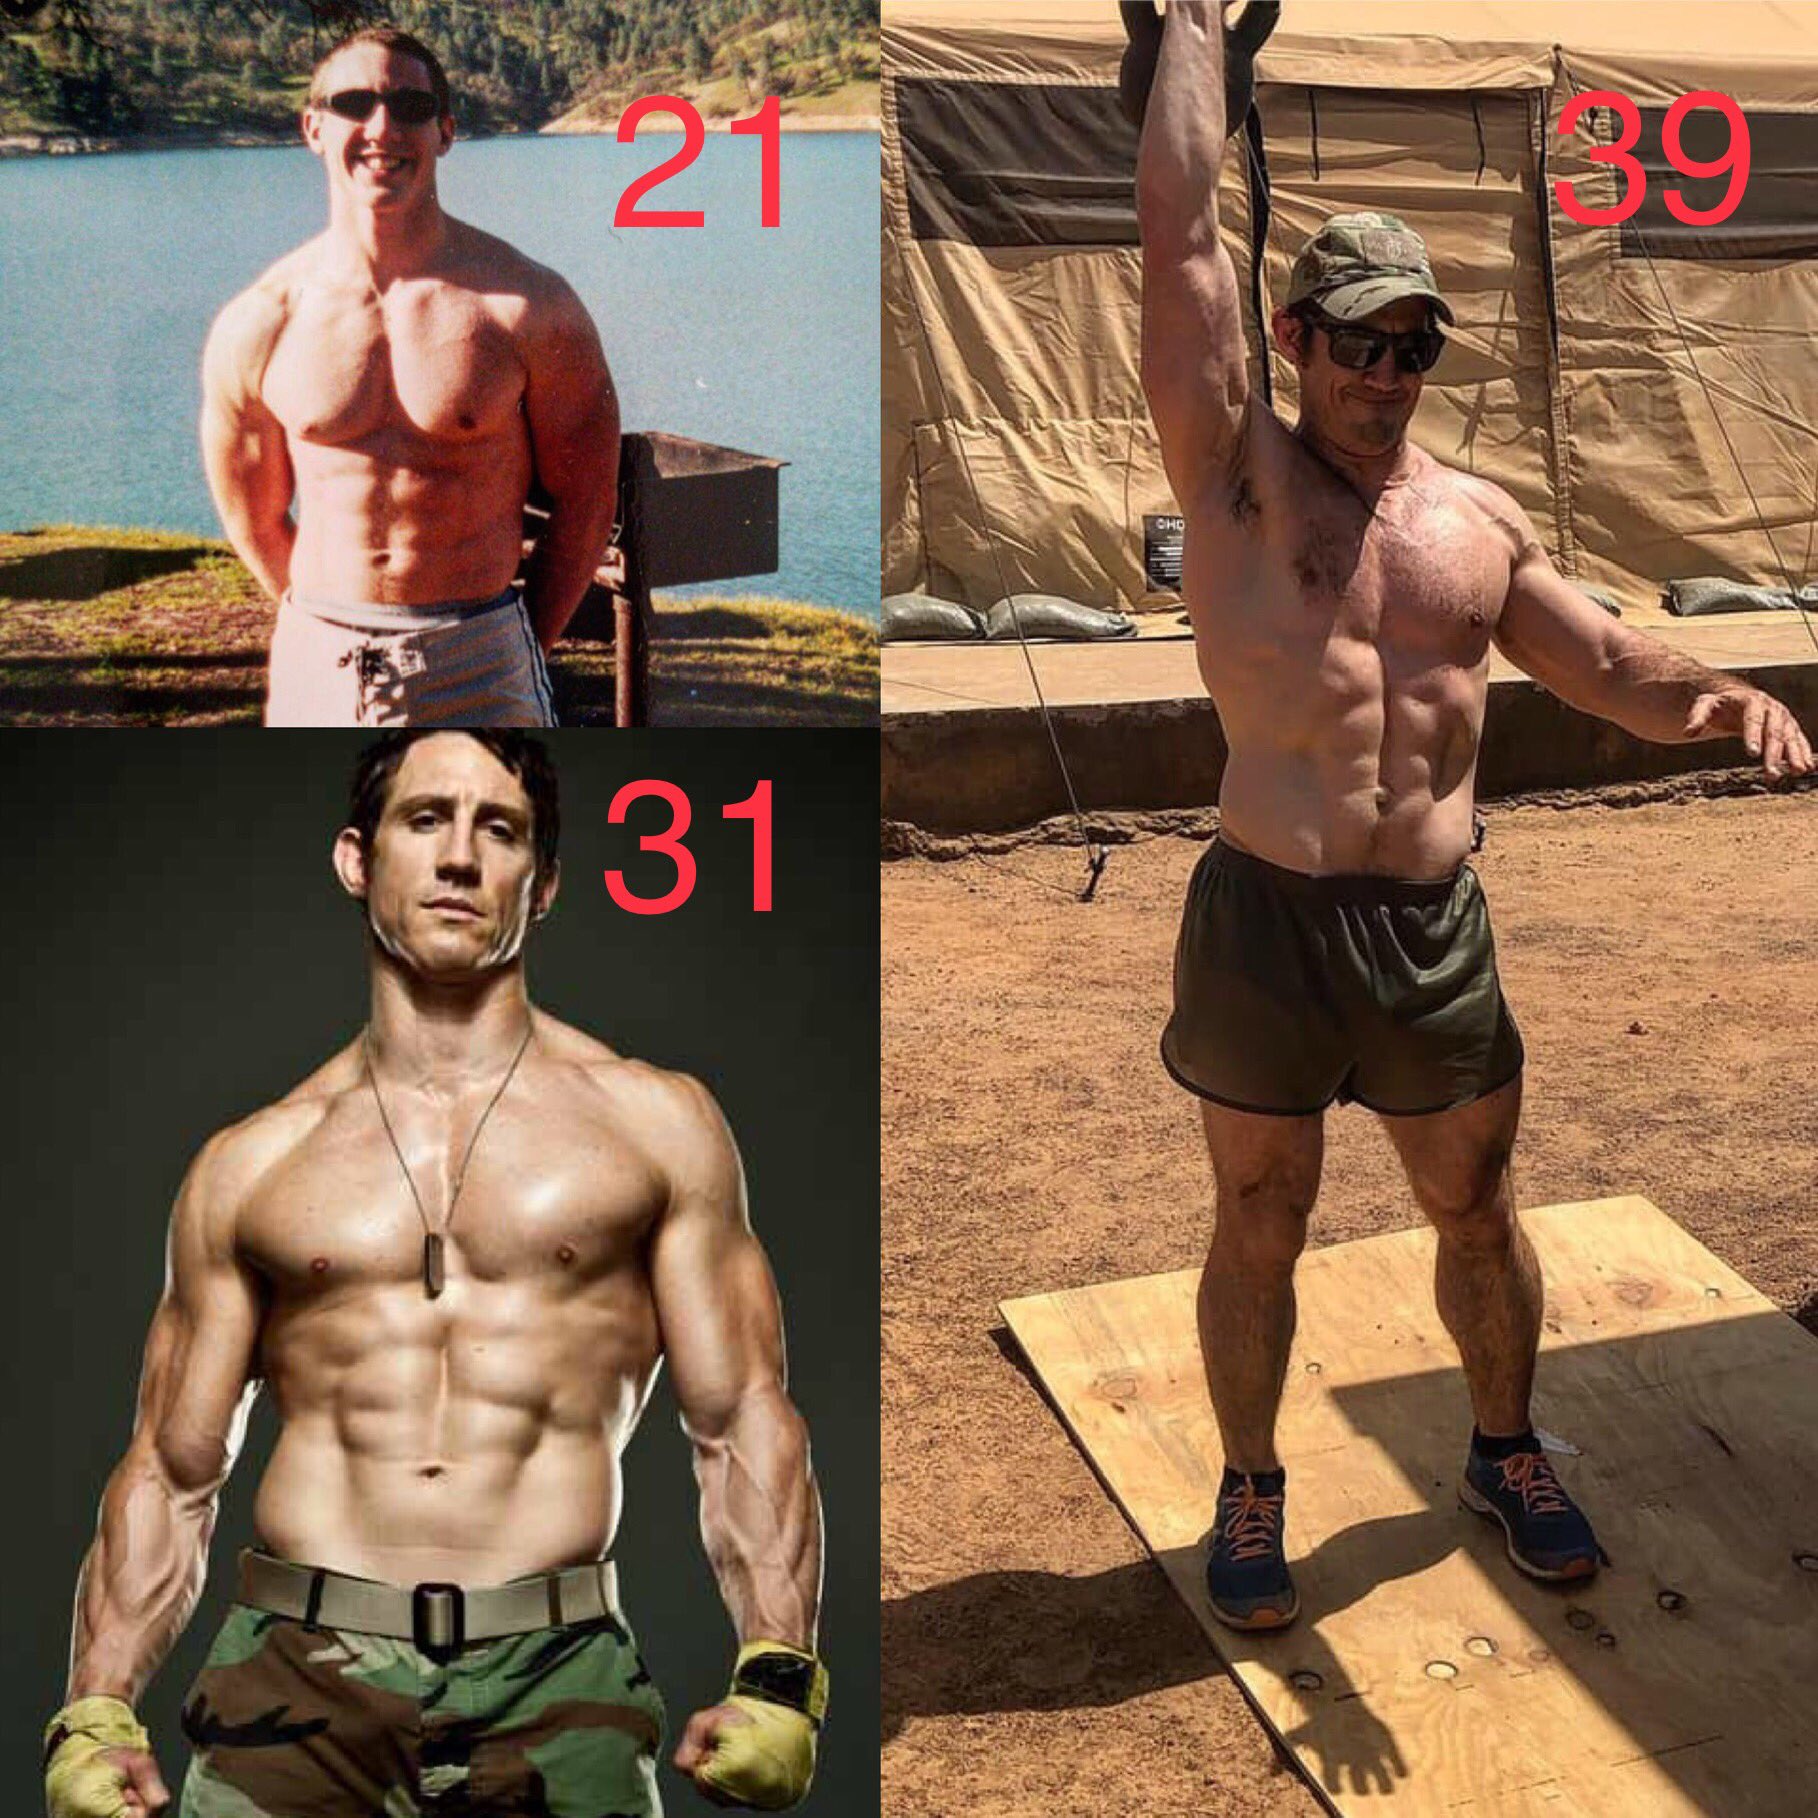 Tim Kennedy on "21, 31, and almost 40 years old. The first picture is when I just turned pro as a fighter. Before The Army, Infantry, Rangers, Special Forces. Before I